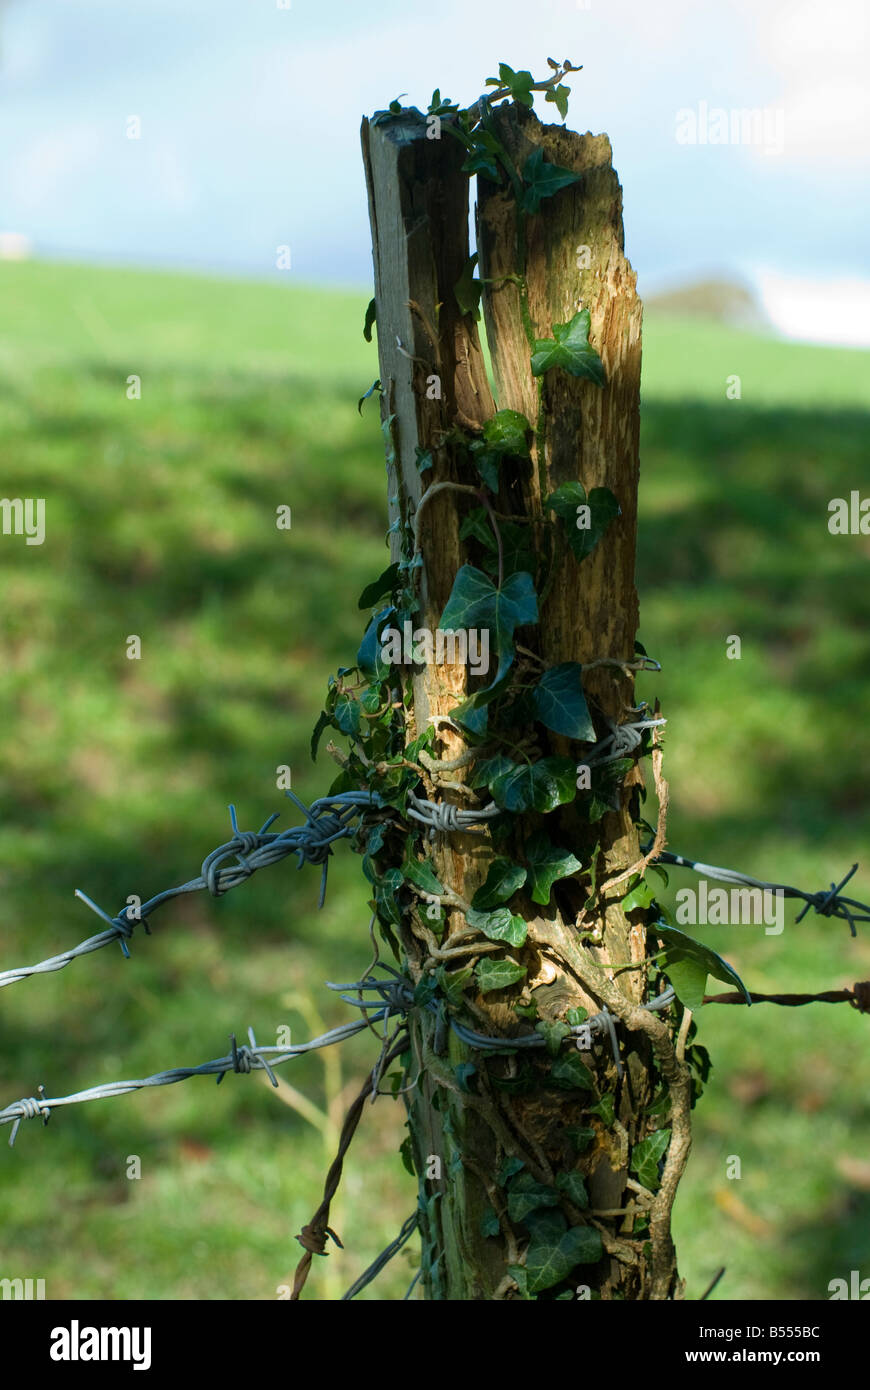 rustic wooden post with barbed wire Stock Photo